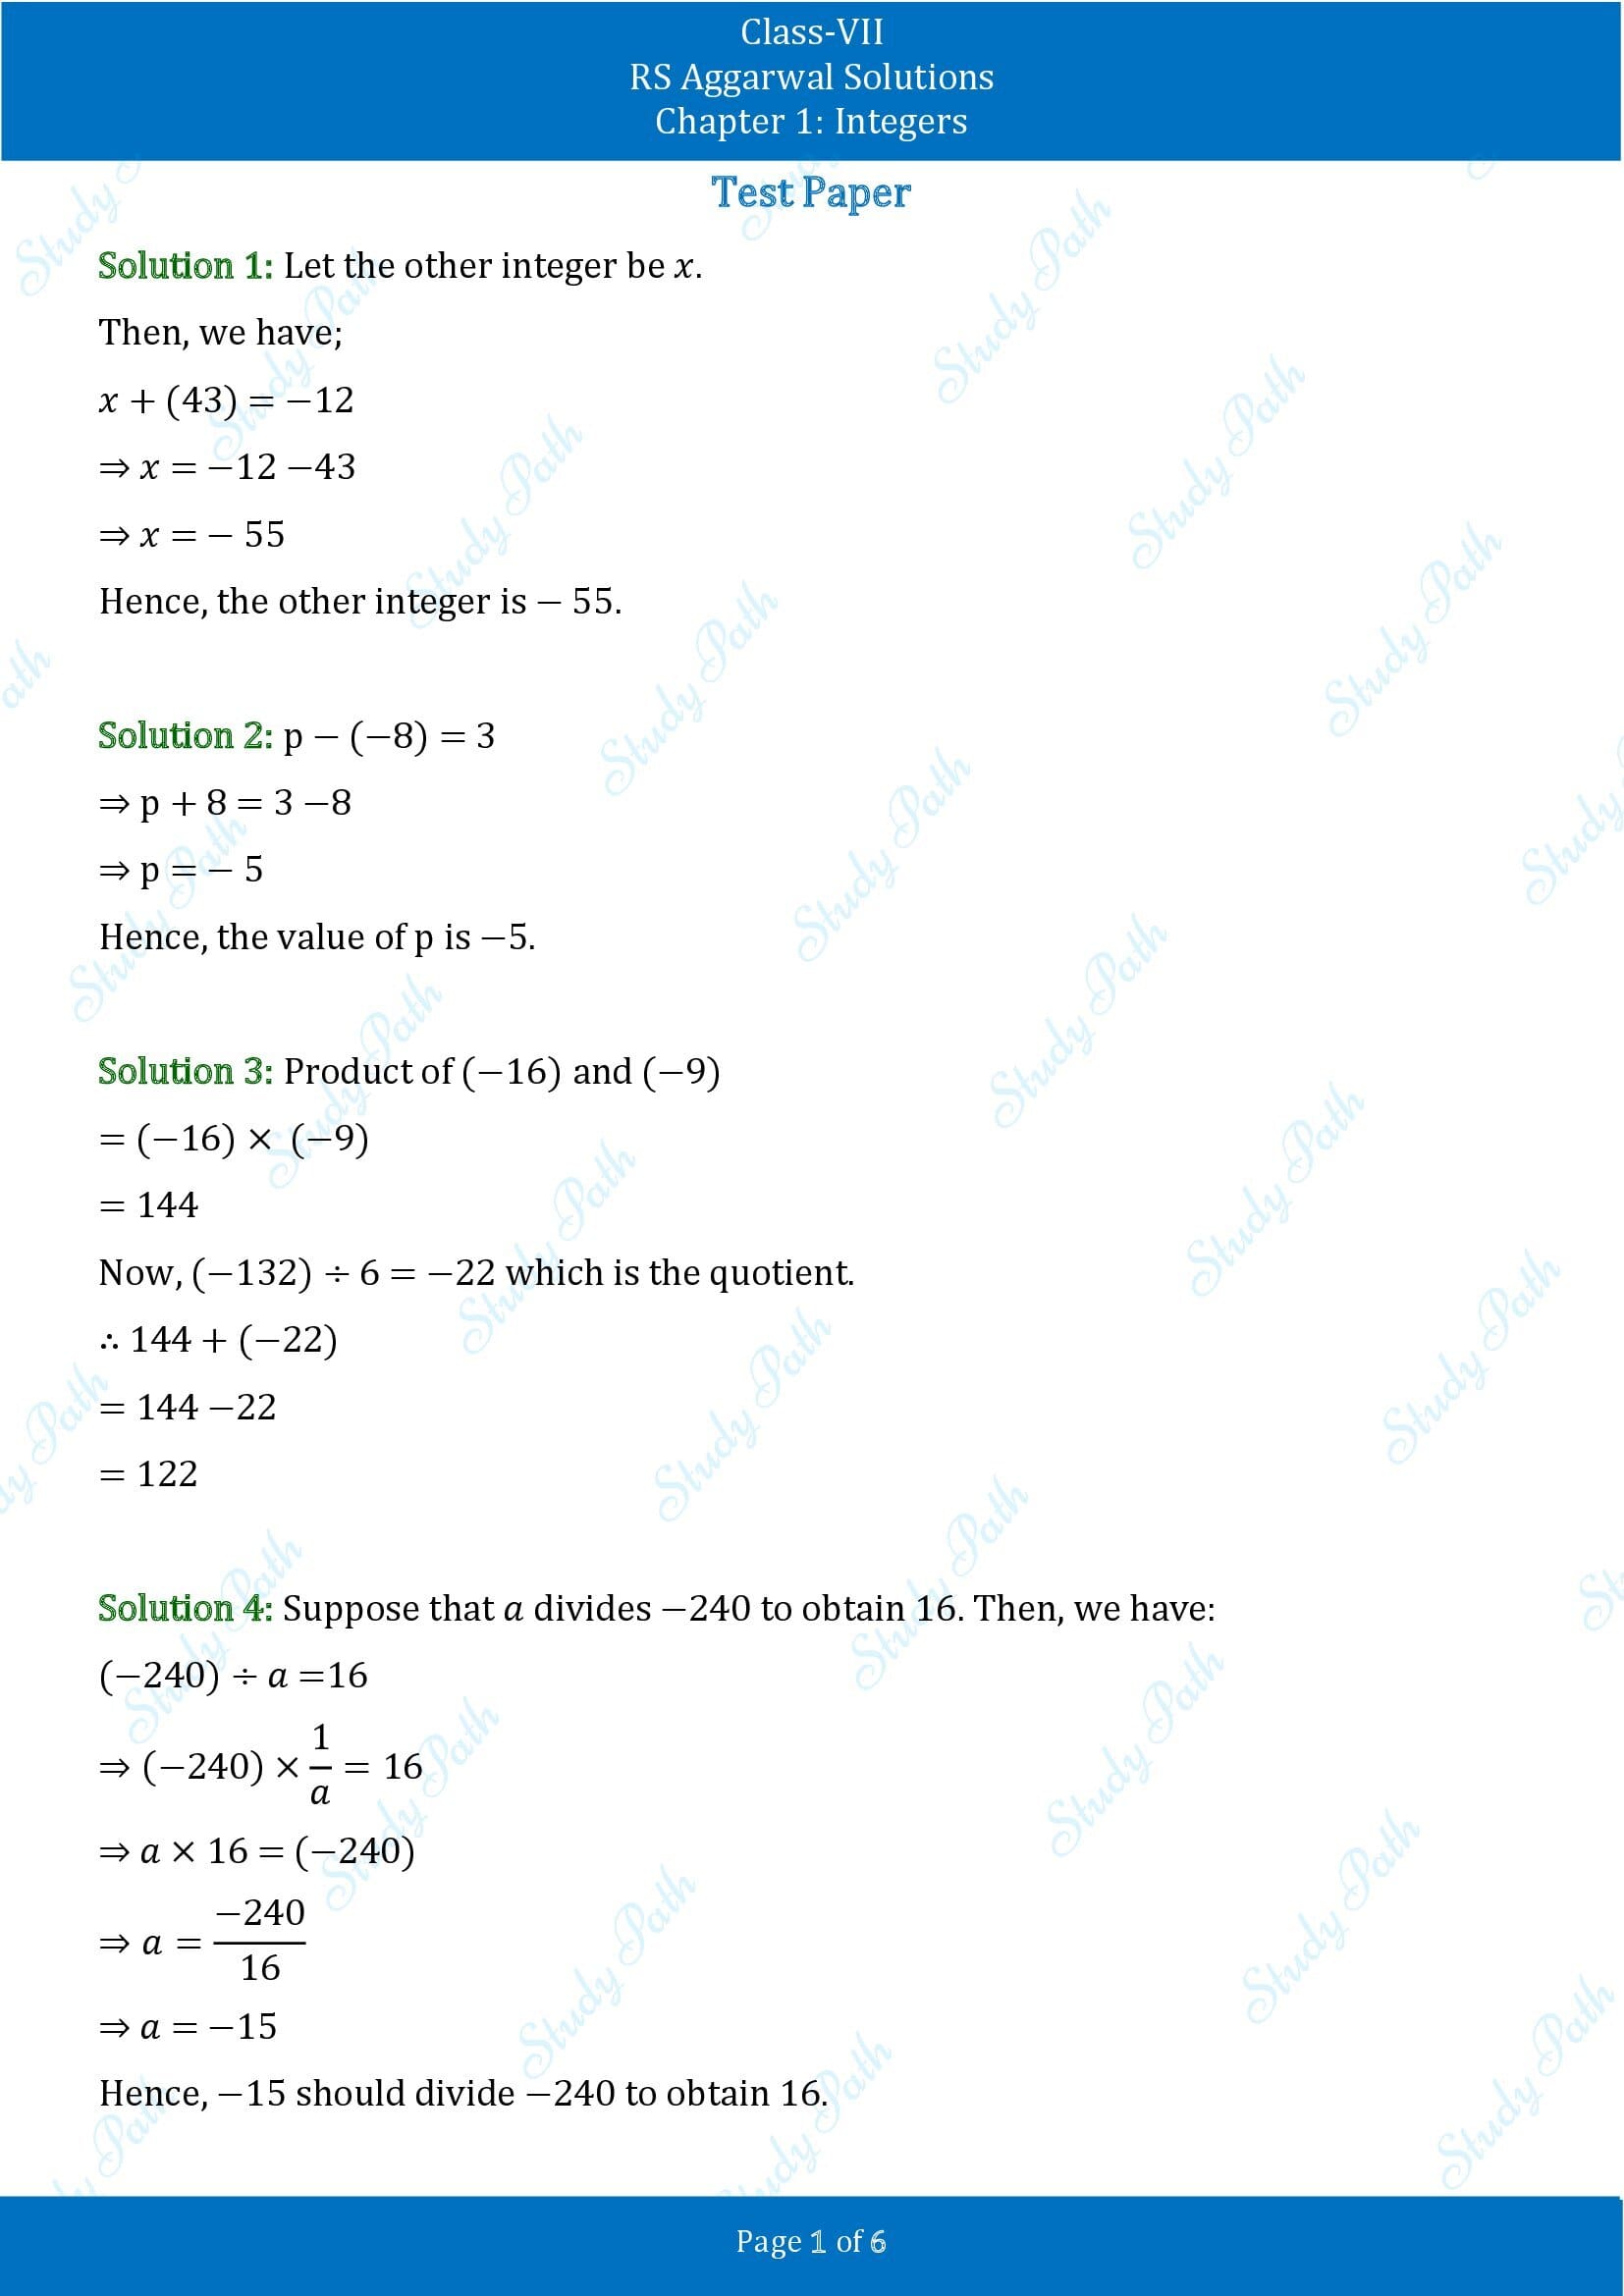 RS Aggarwal Solutions Class 7 Chapter 1 Integers Test Paper 00001